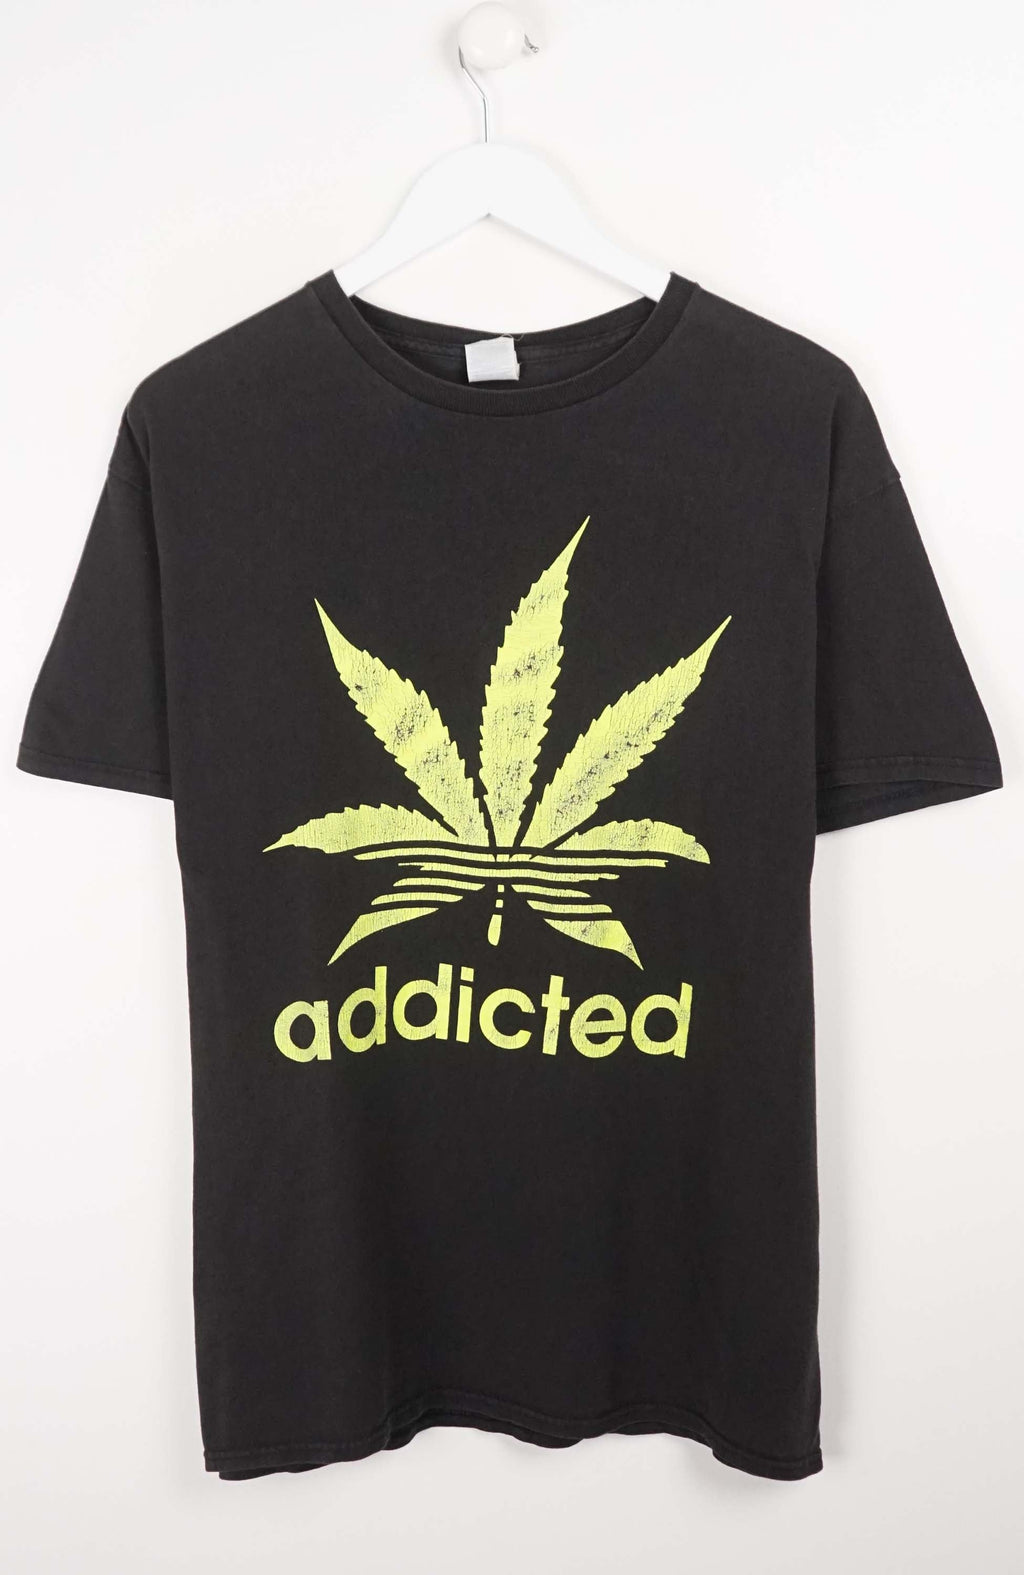 VINTAGE ADDICTED WEED T-SHIRT (L)